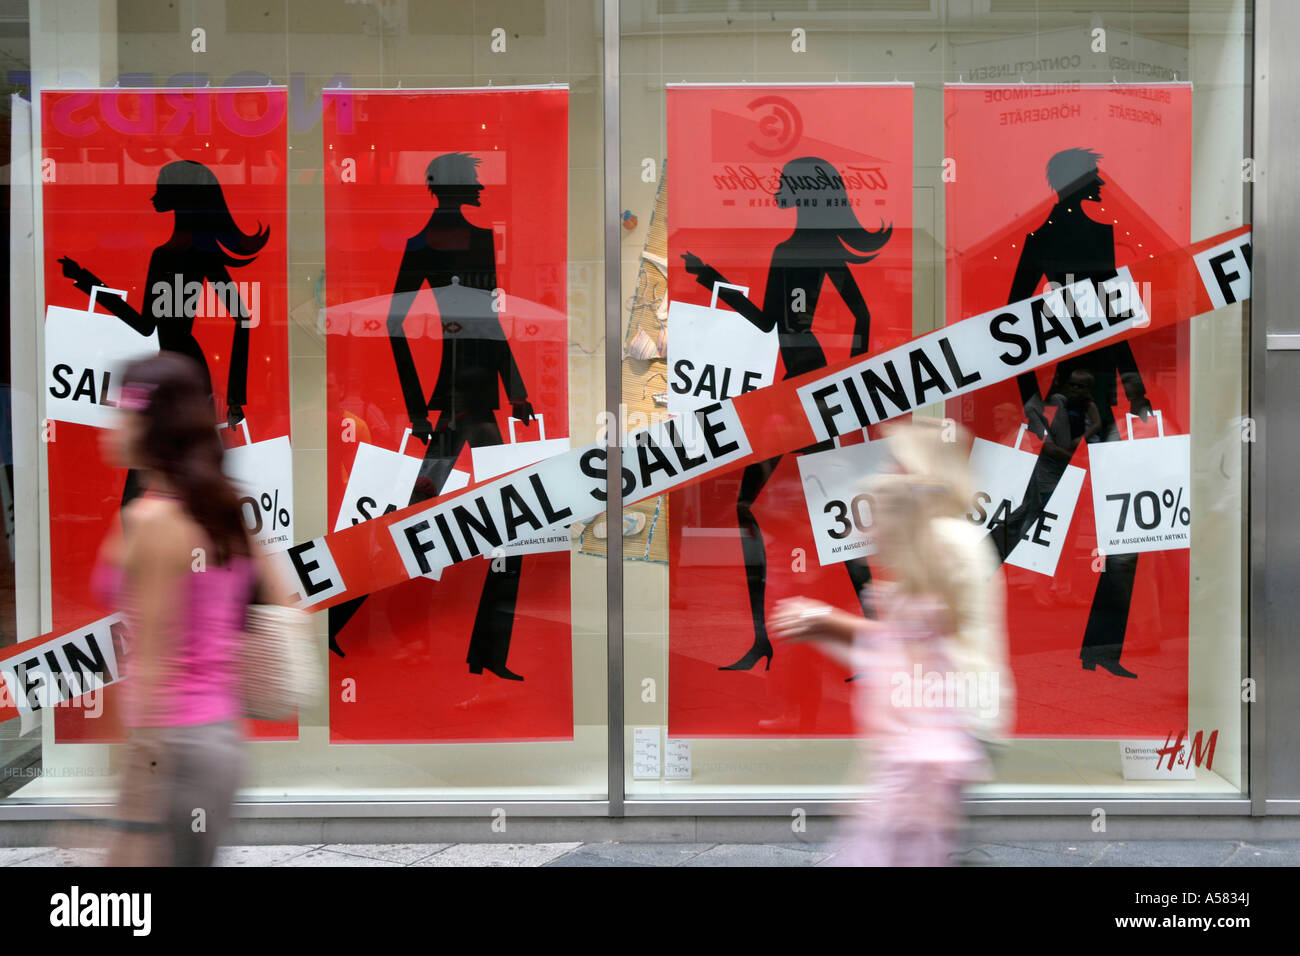 Posters 'Final sale' at a shop window Stock Photo